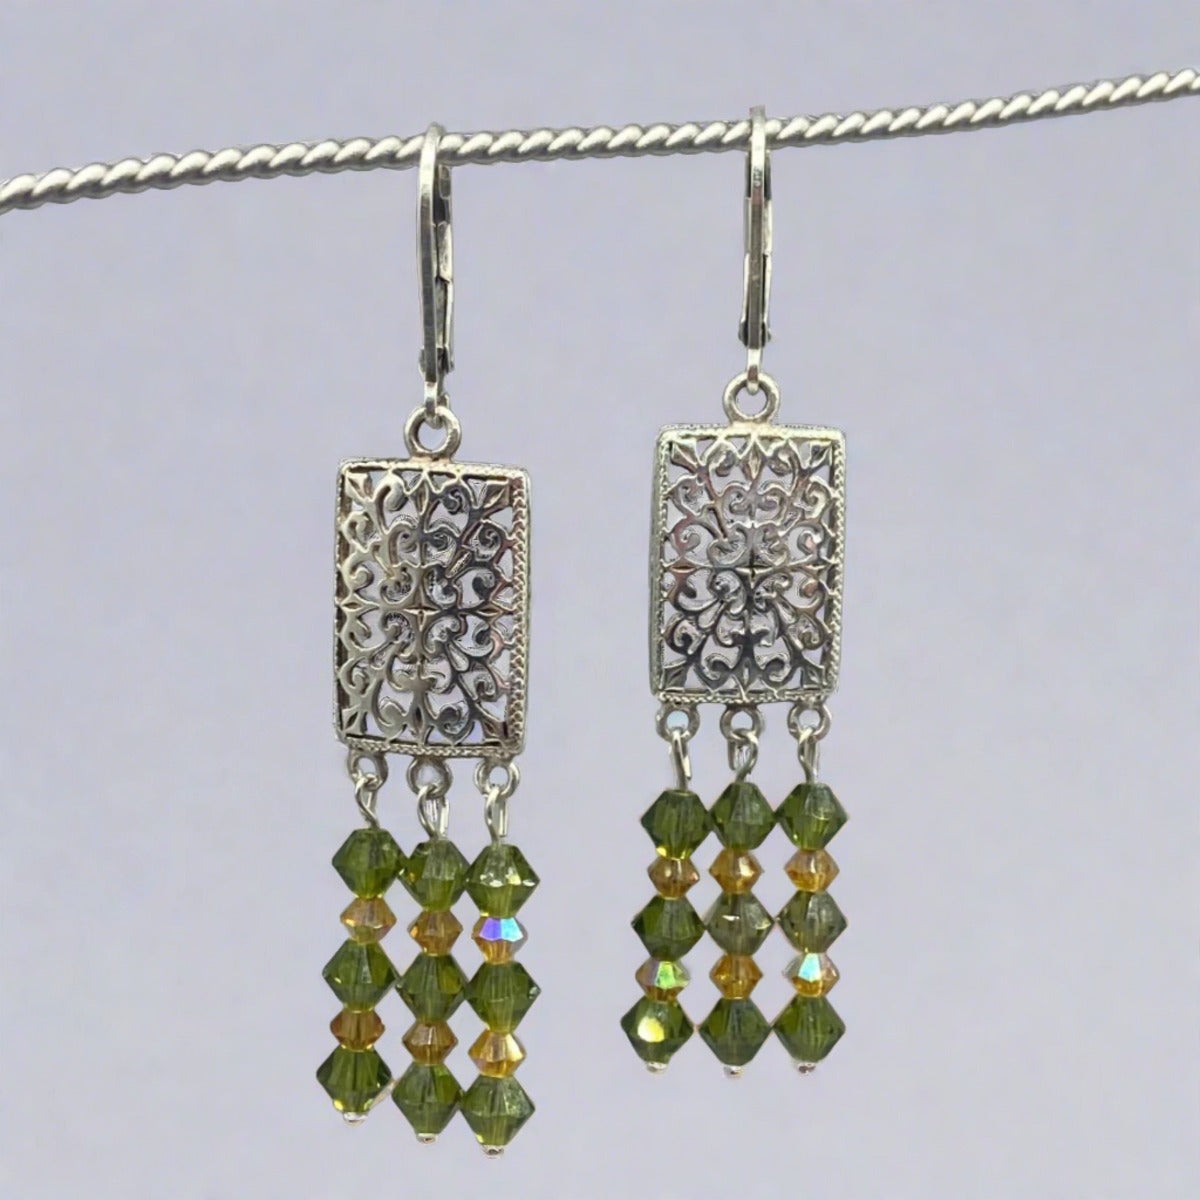 Pair of exquisite olivine crystal chandelier earrings featuring shimmering crystals